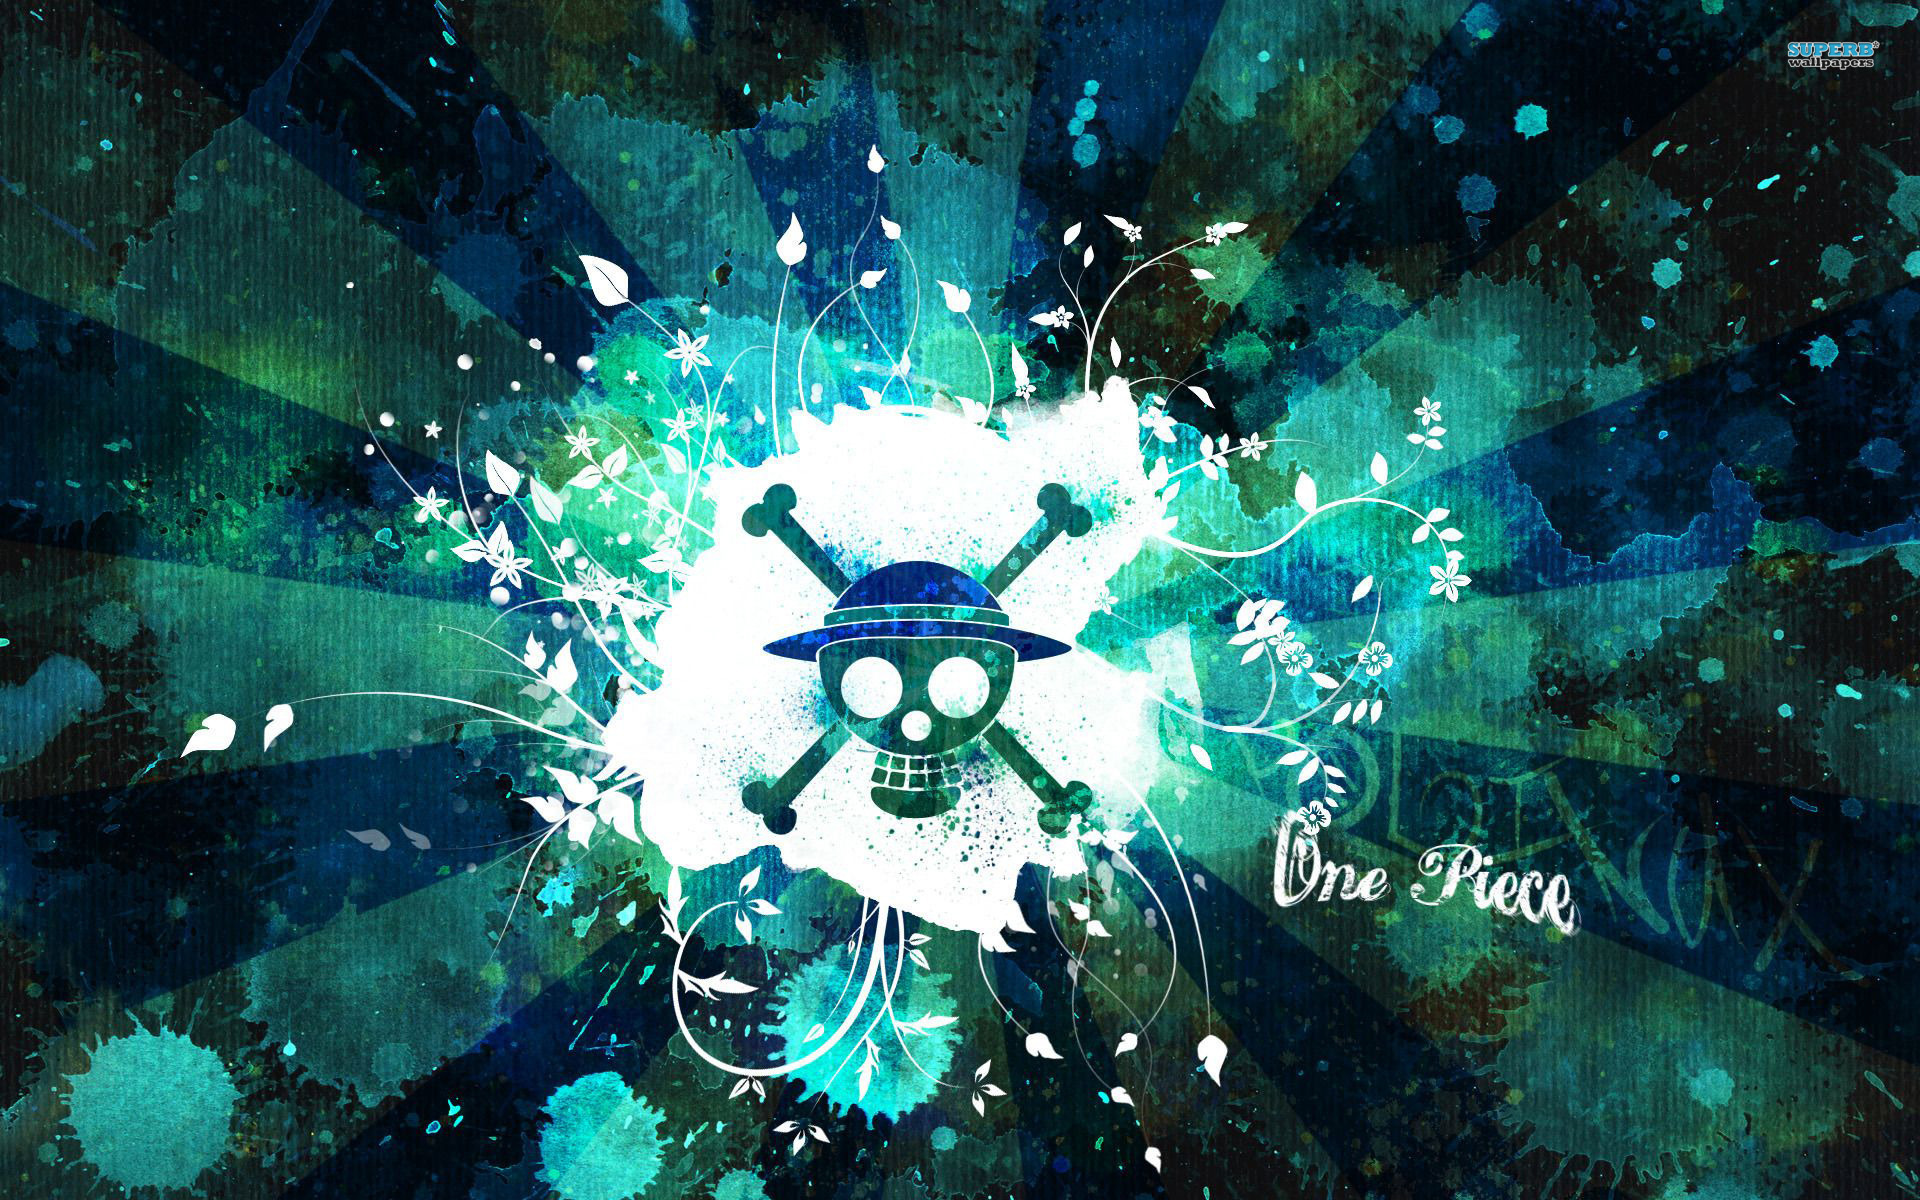 One Piece wallpaper - Anime wallpapers - #14006